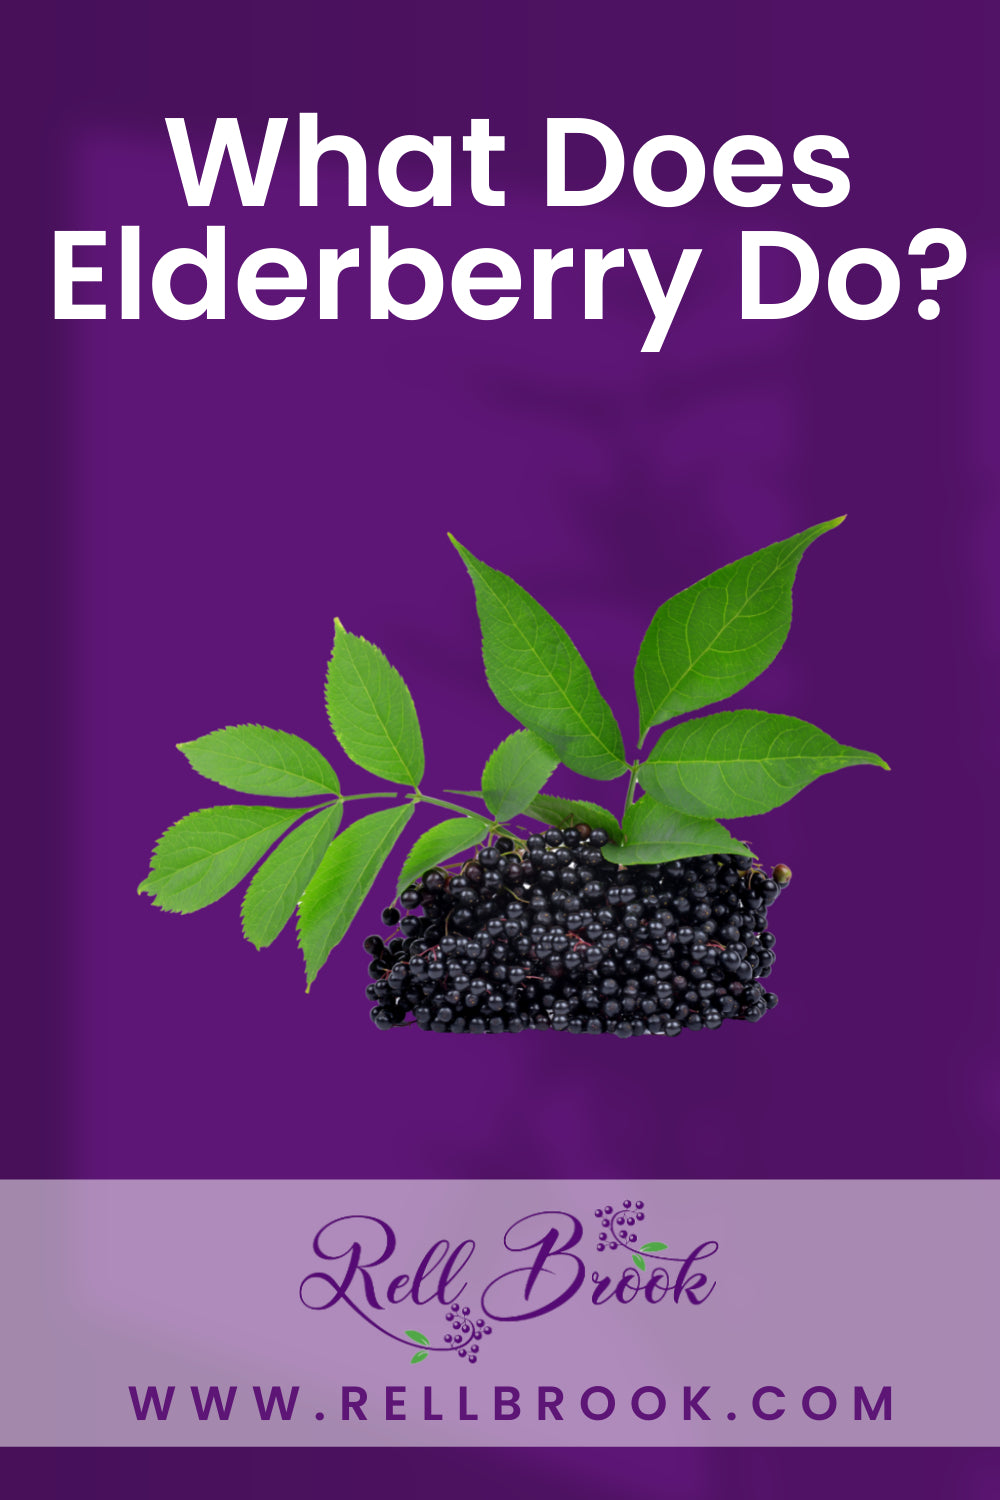 What does elderberry do